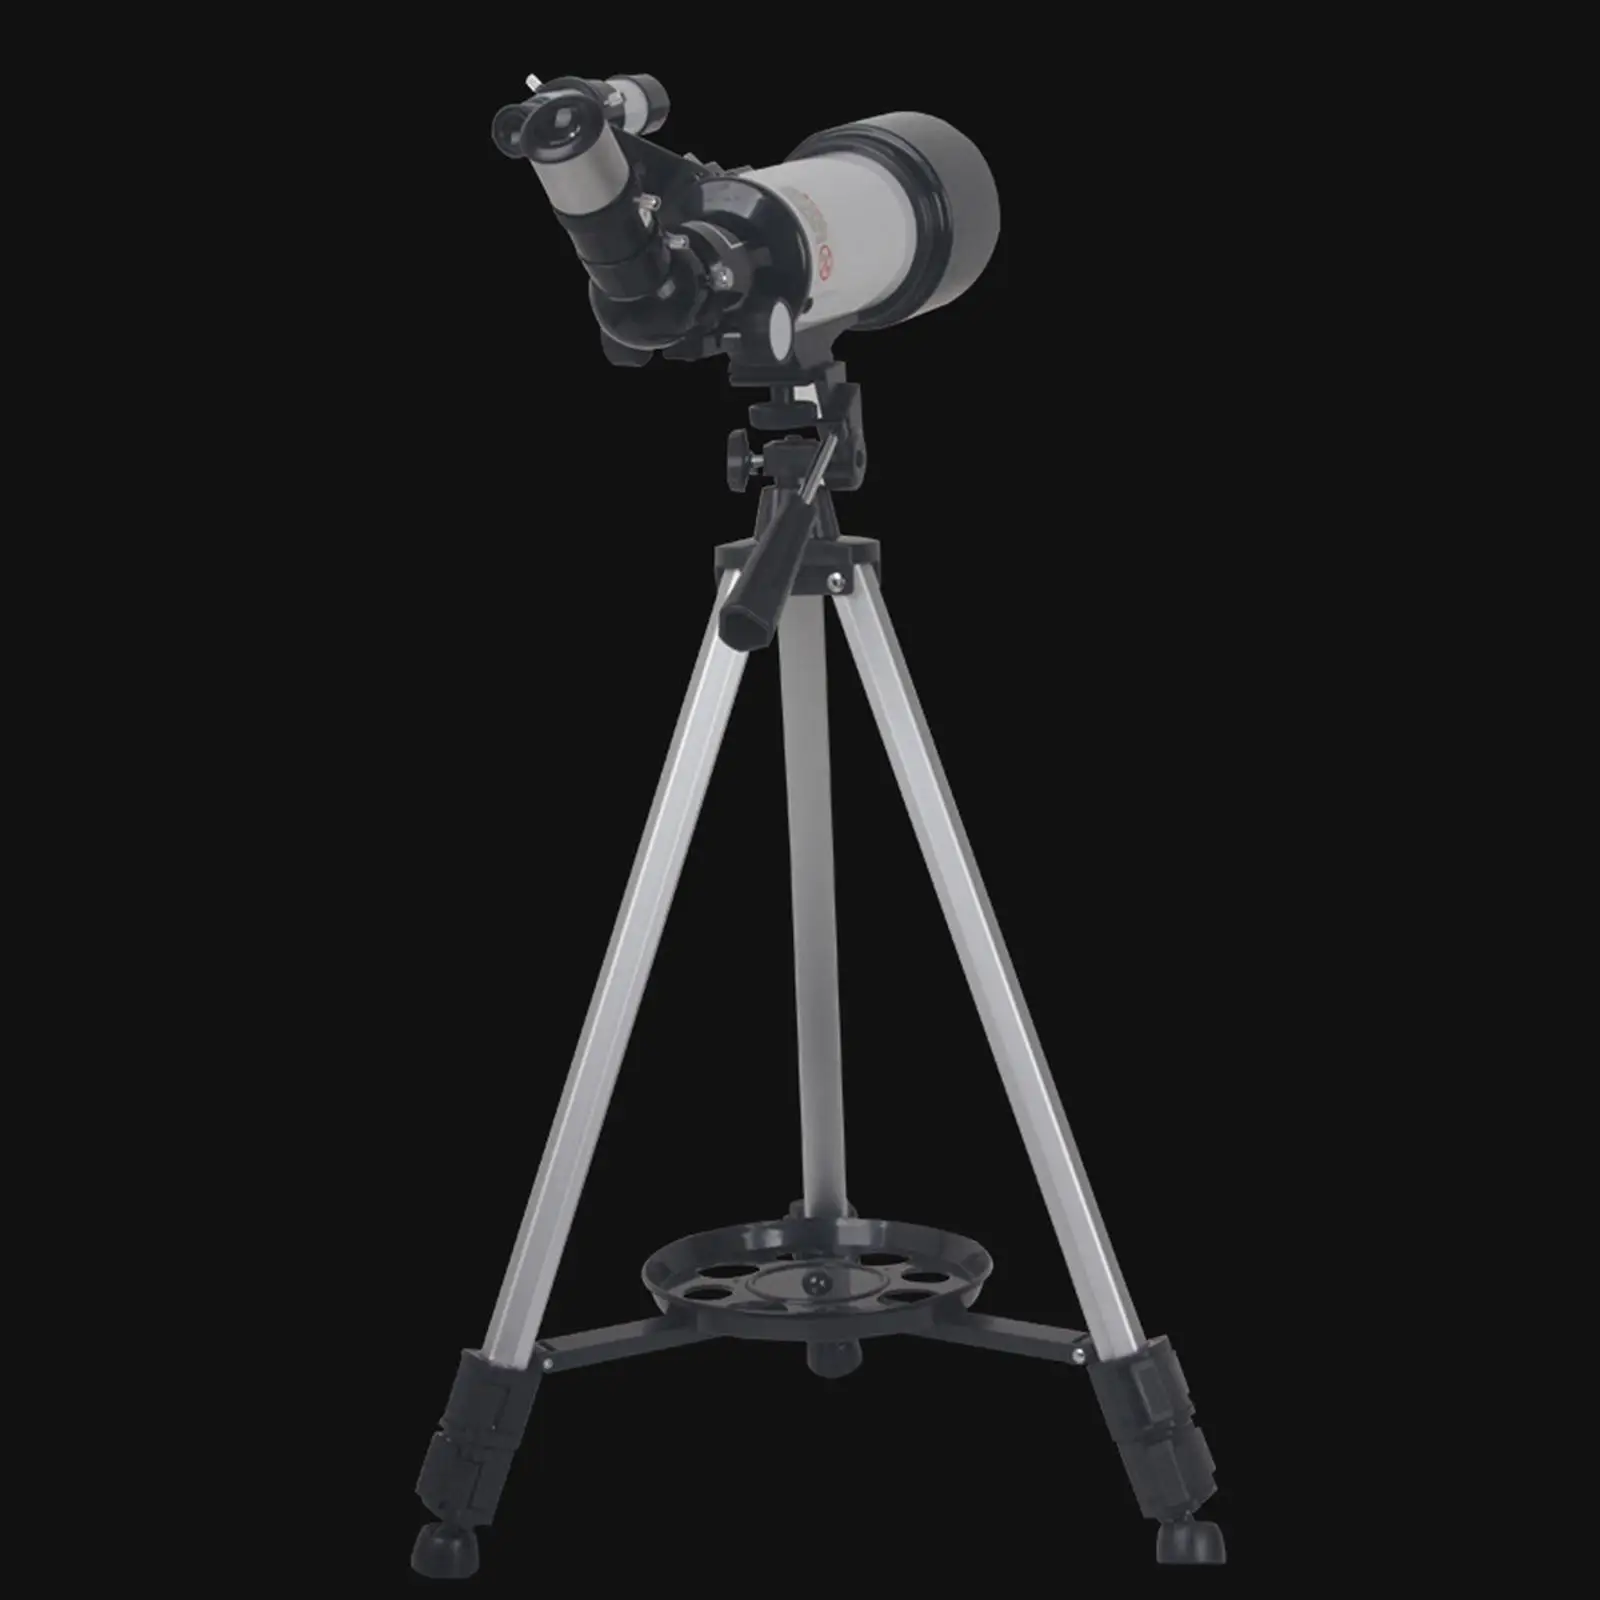 

70mm Aperture 400mm Focal Length Telescope for Beginners with 10mm, 25mm Eyepieces Fully Multi Coated Optics Simple to Setup